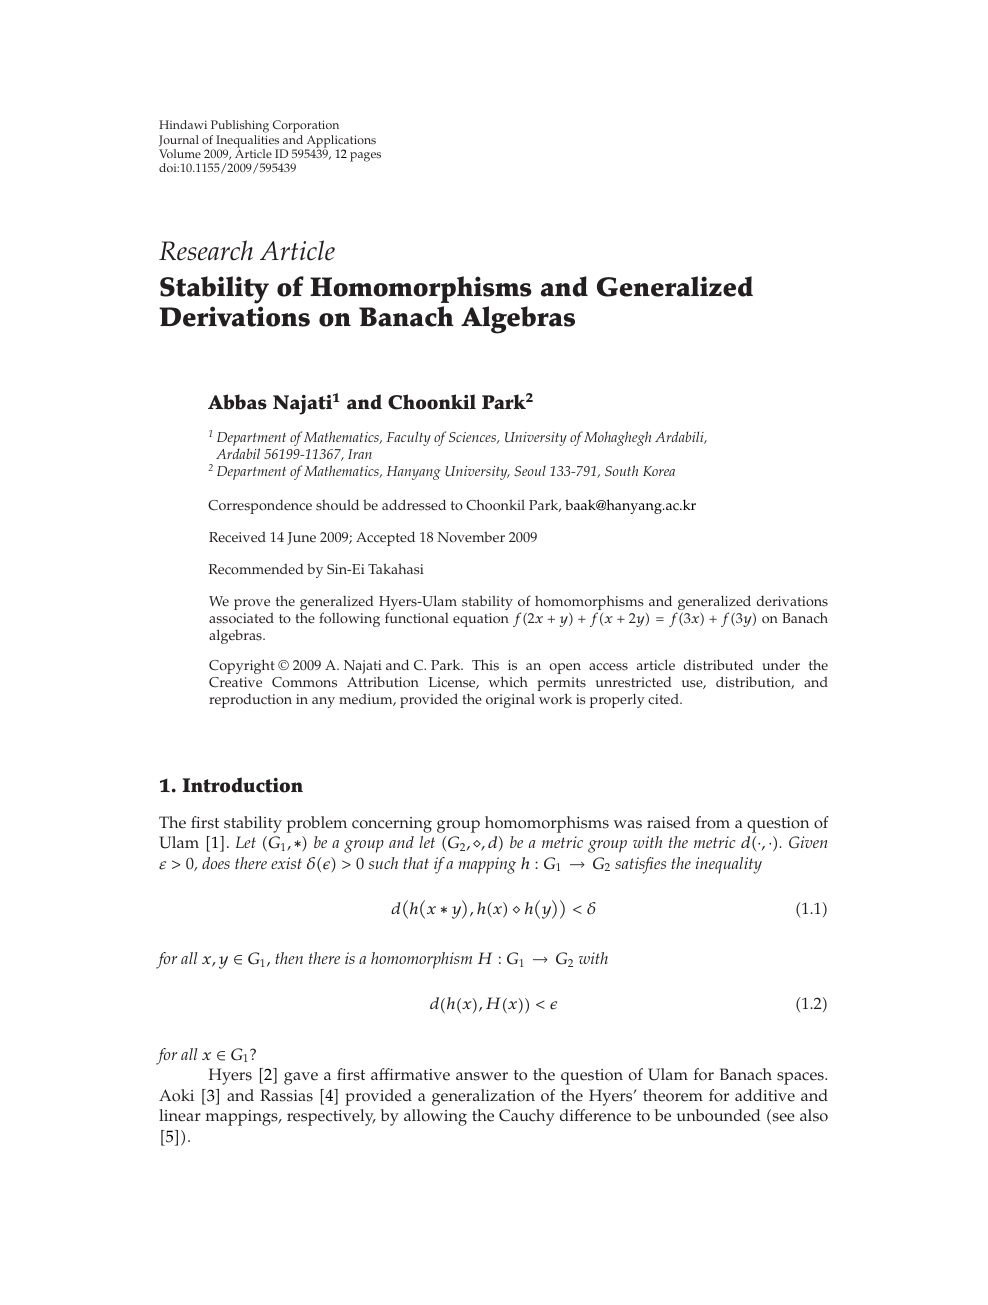 Stability Of Homomorphisms And Generalized Derivations On Banach Algebras Topic Of Research Paper In Mathematics Download Scholarly Article Pdf And Read For Free On Cyberleninka Open Science Hub